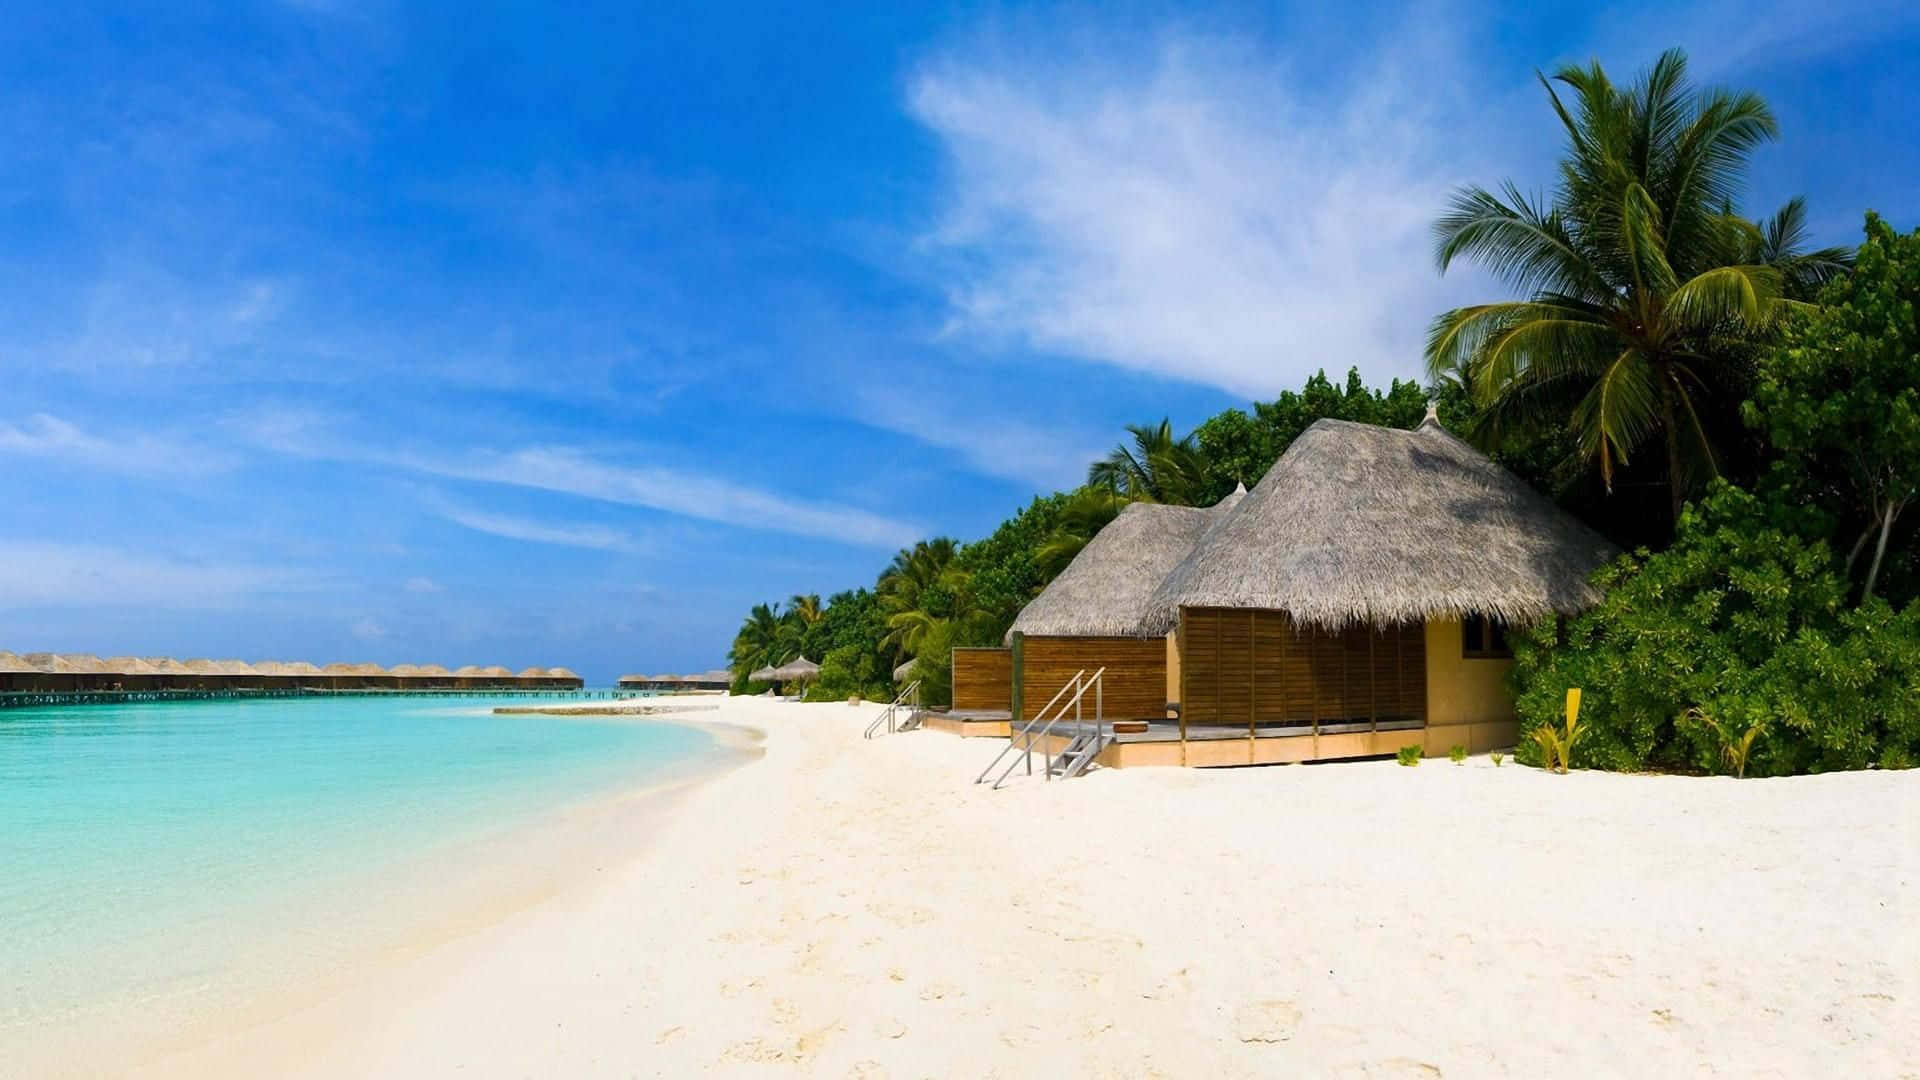 Relax in Paradise at our Luxurious Beach Resort! Wallpaper